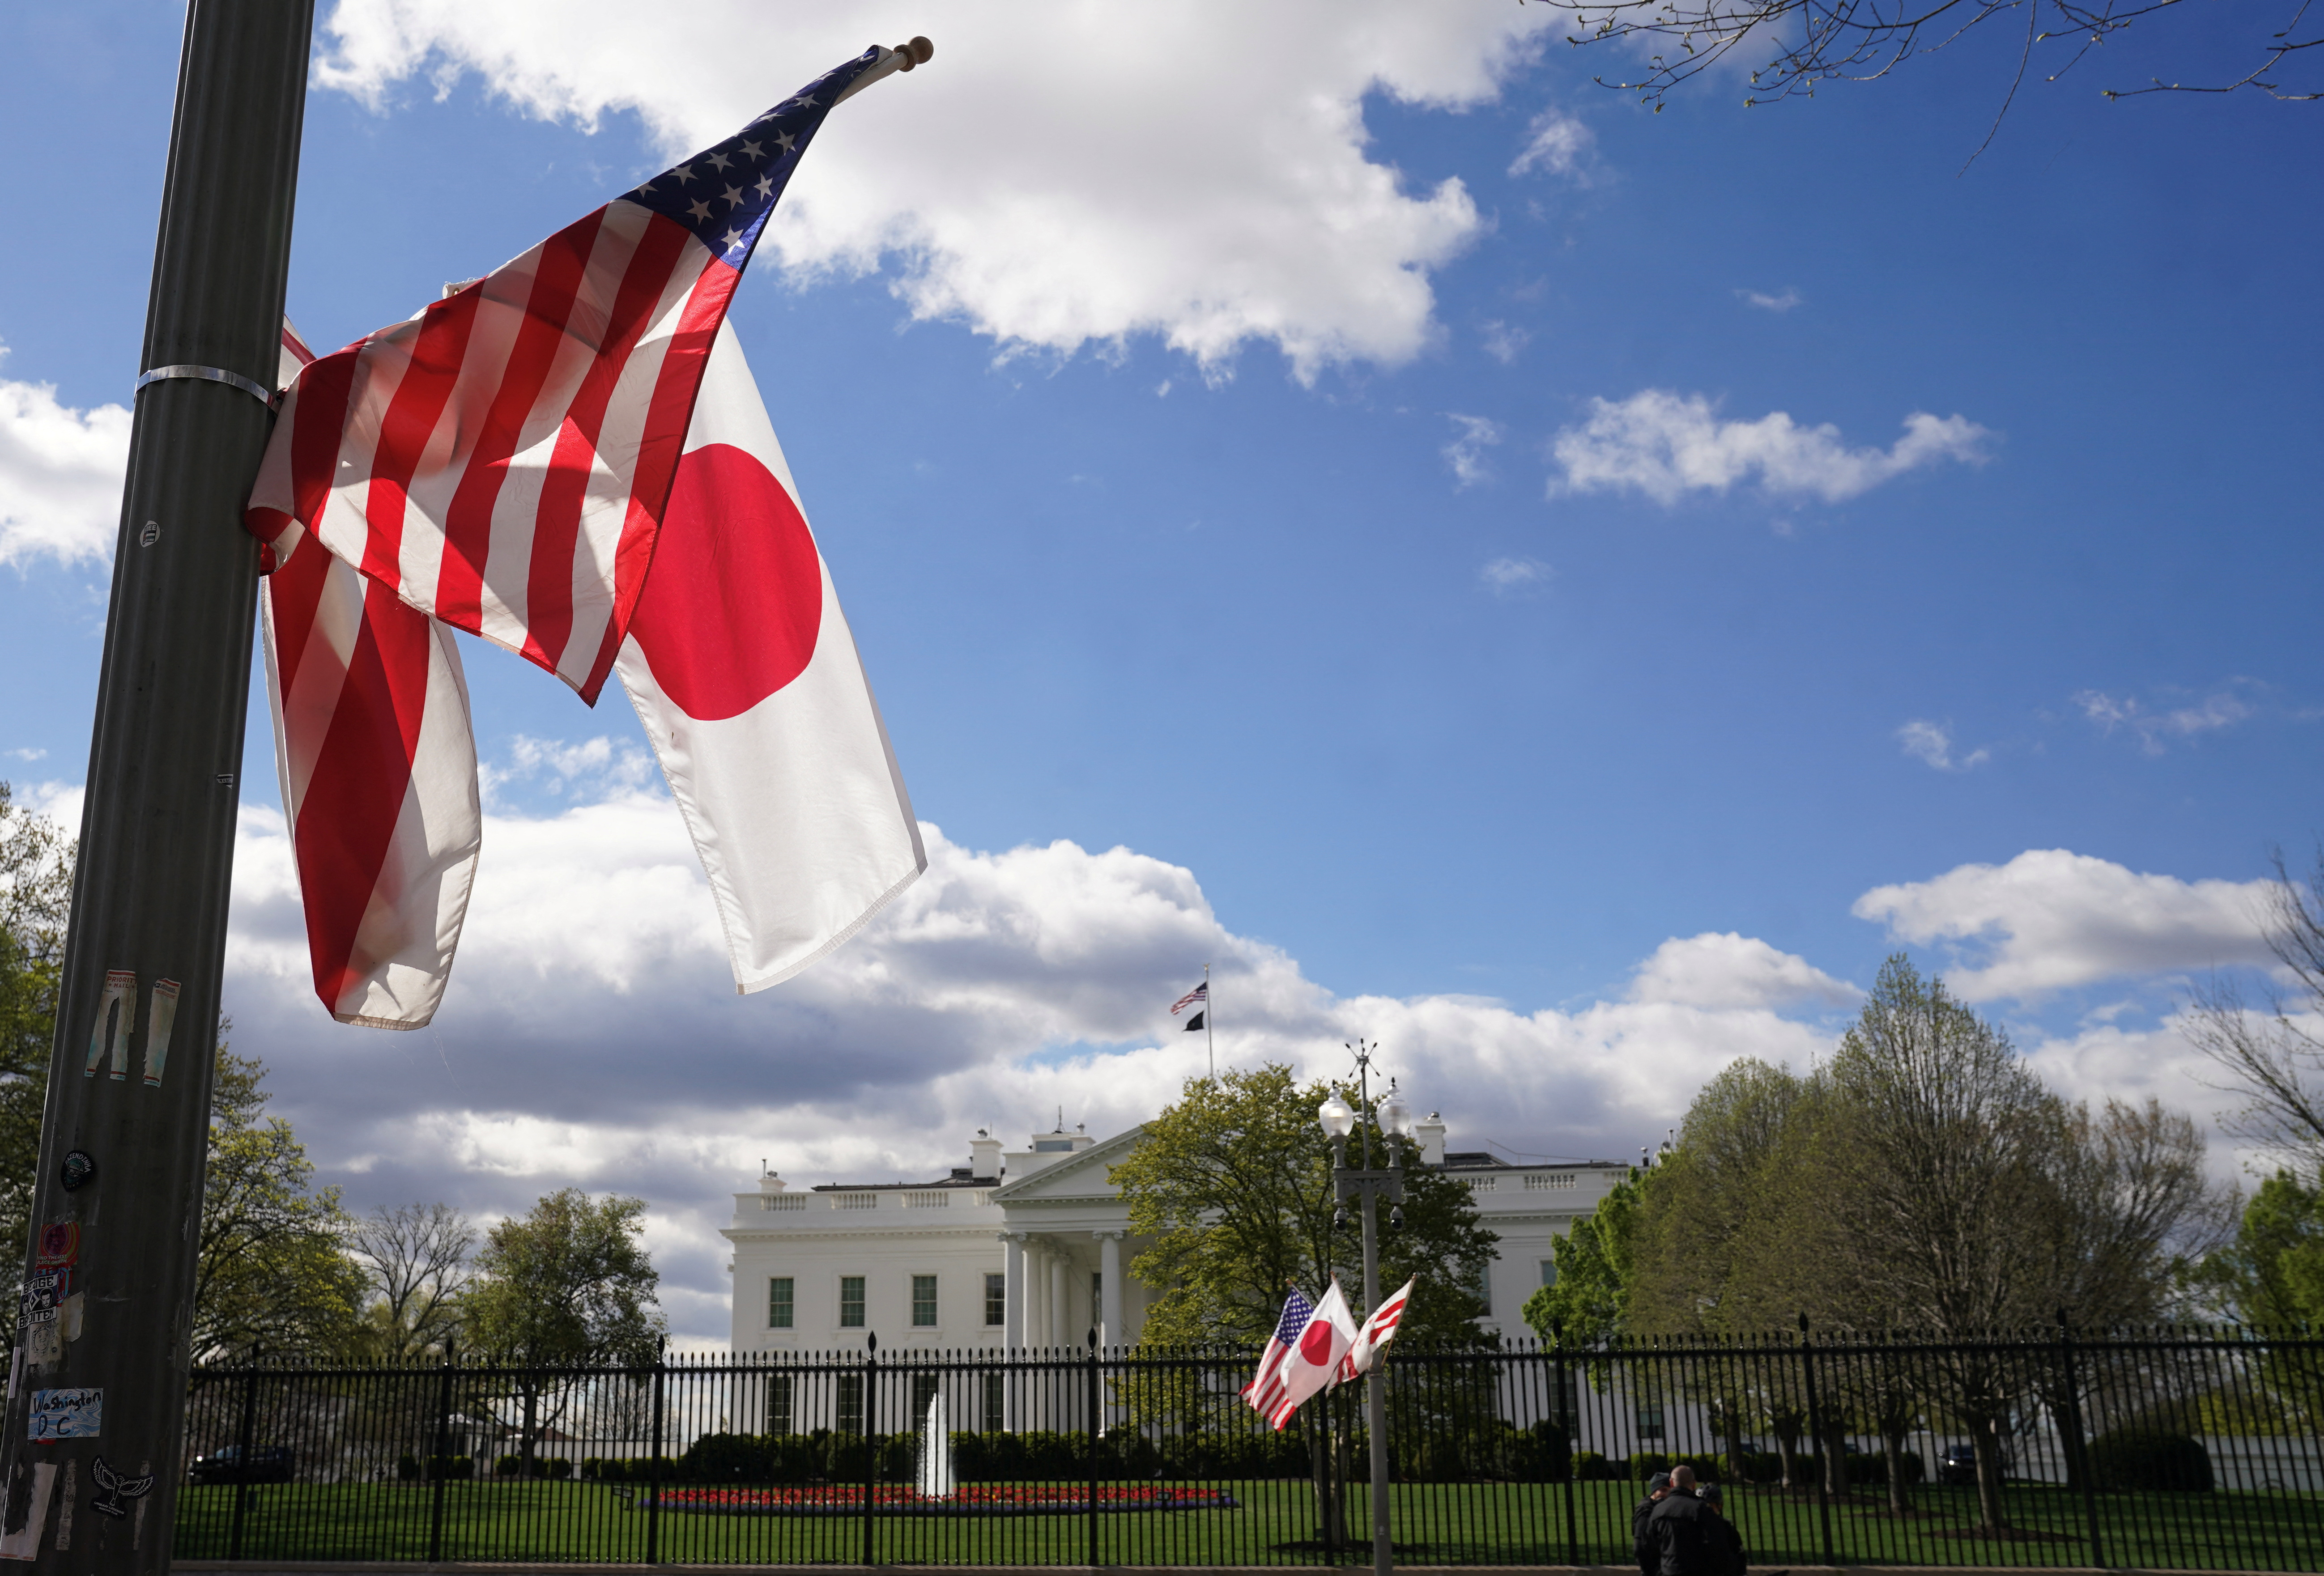 Japanese and U.S. flags at the White House in Washington ahead of State Visit